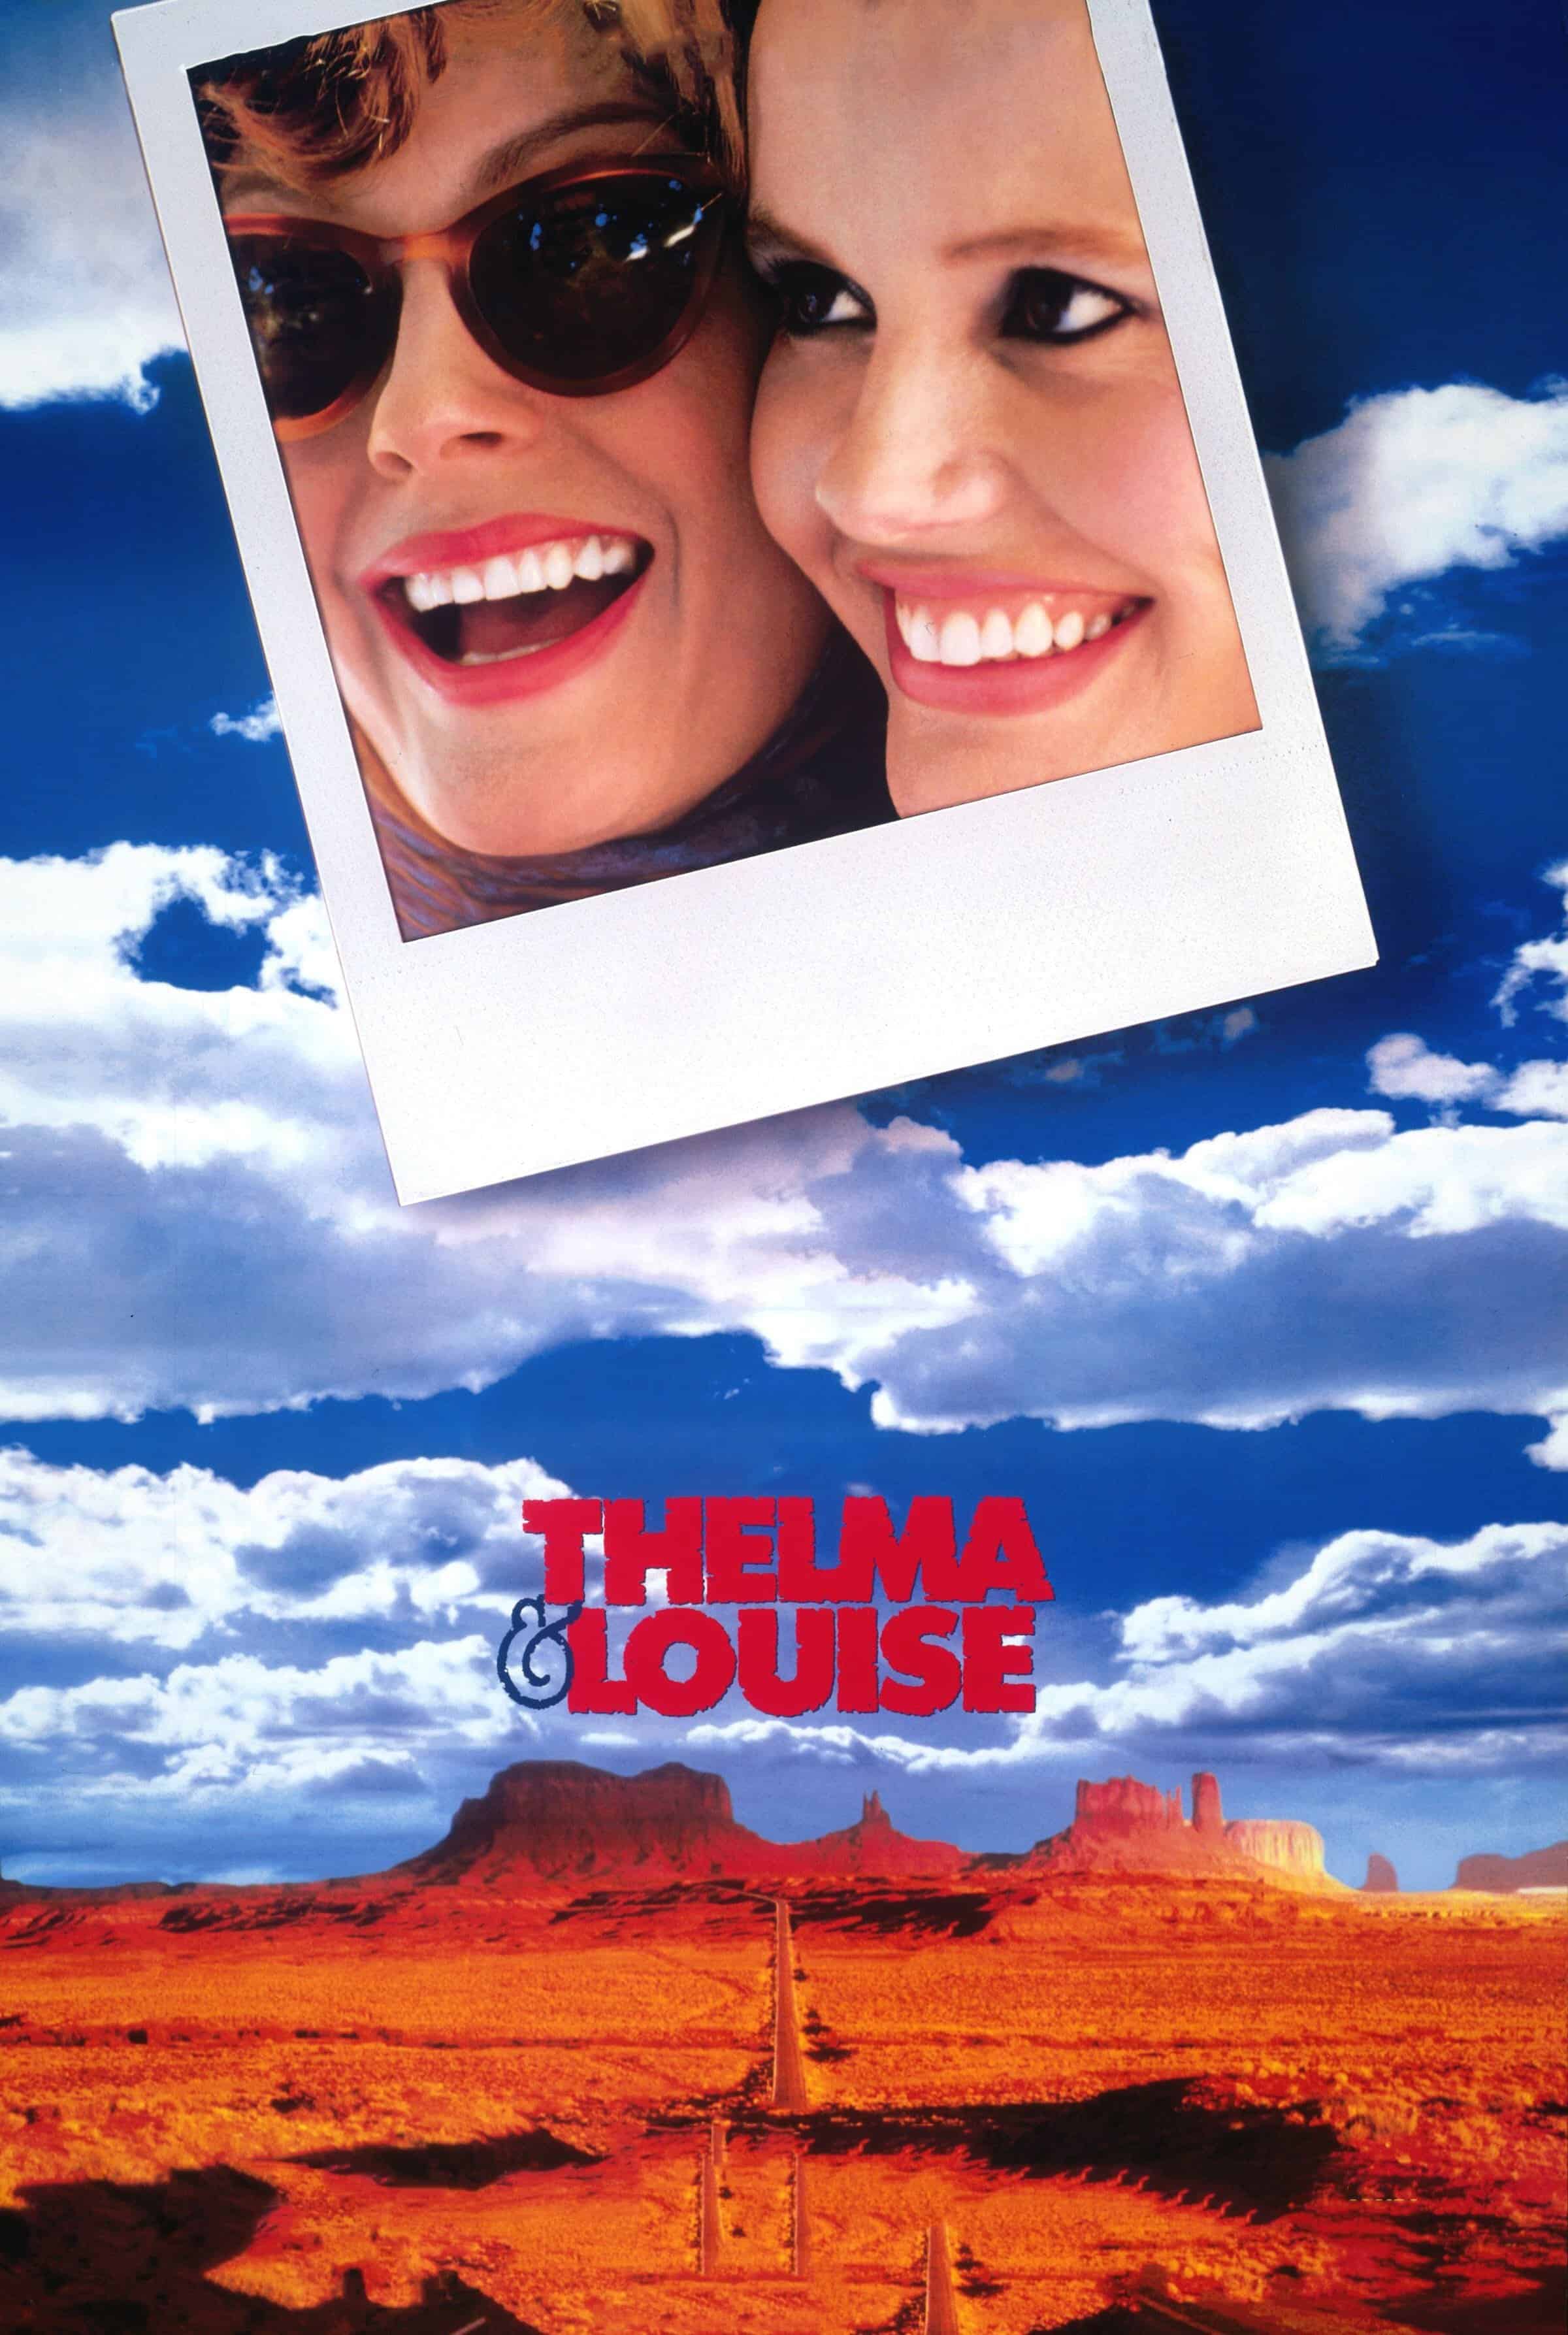 Thelma and Louise, 1991 